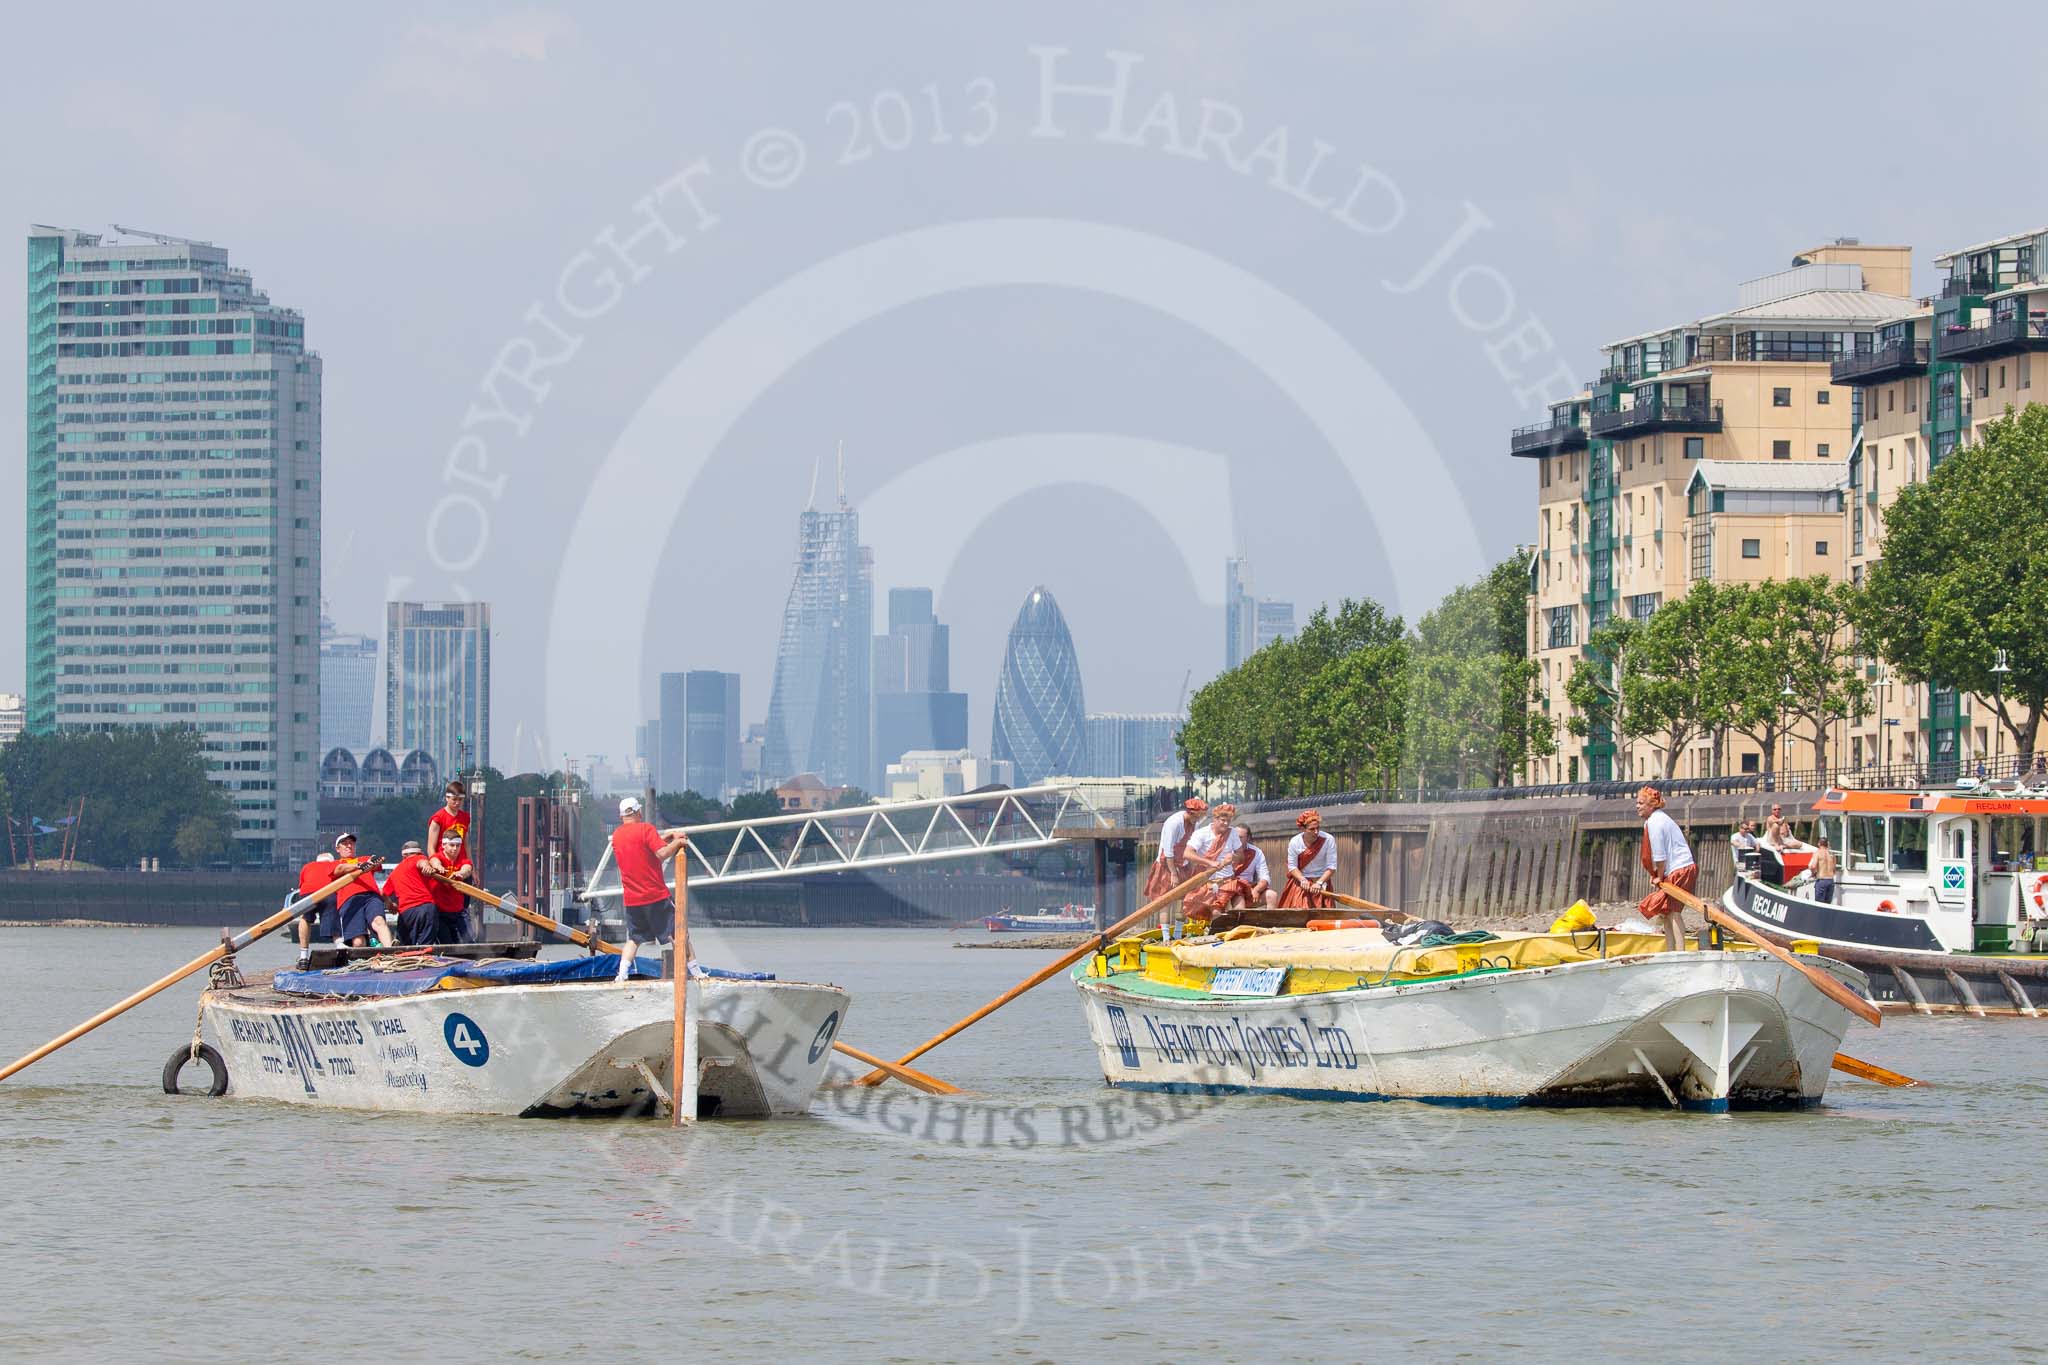 TOW River Thames Barge Driving Race 2013: Barge "Hoppy", by GPS Fabrication, approaching Masthouse Terrace Pier. On the left barge "Spirit of Mountabatten", by Mechanical Movements and Enabling Services Ltd. In the background the skyscrapers of the City of London..
River Thames between Greenwich and Westminster,
London,

United Kingdom,
on 13 July 2013 at 12:41, image #169